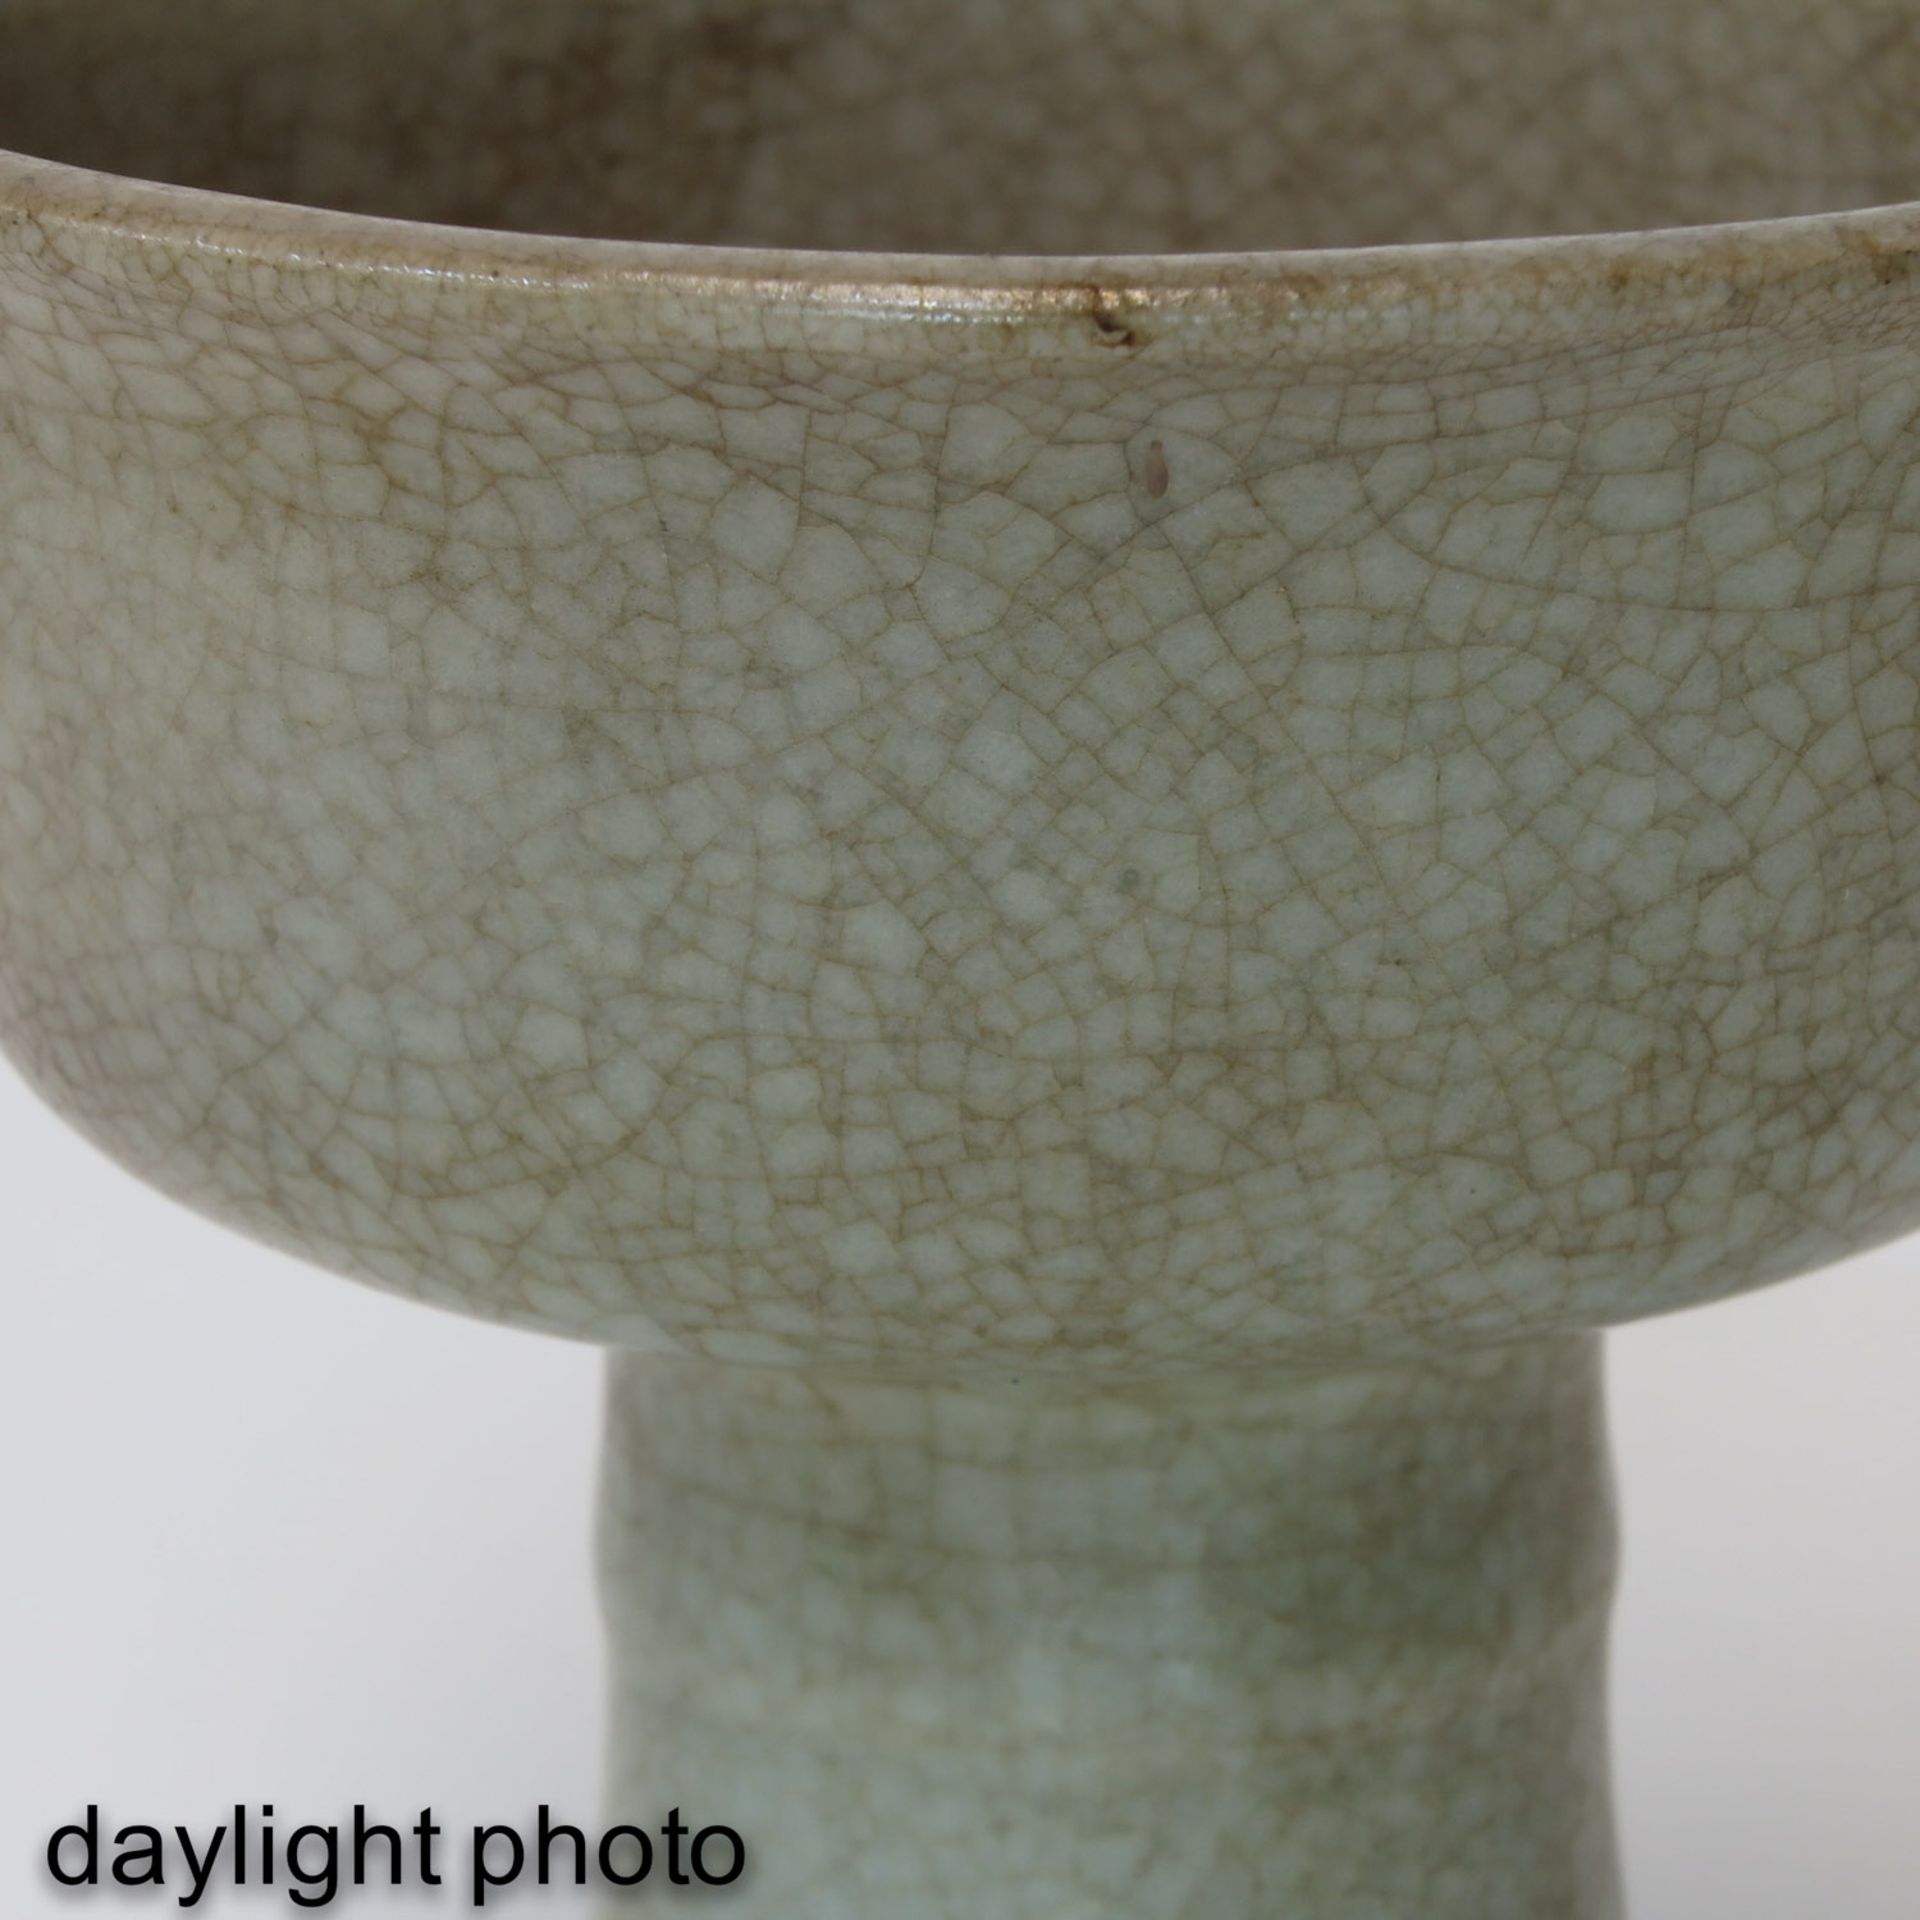 A Stem Cup and Bowl - Image 10 of 10